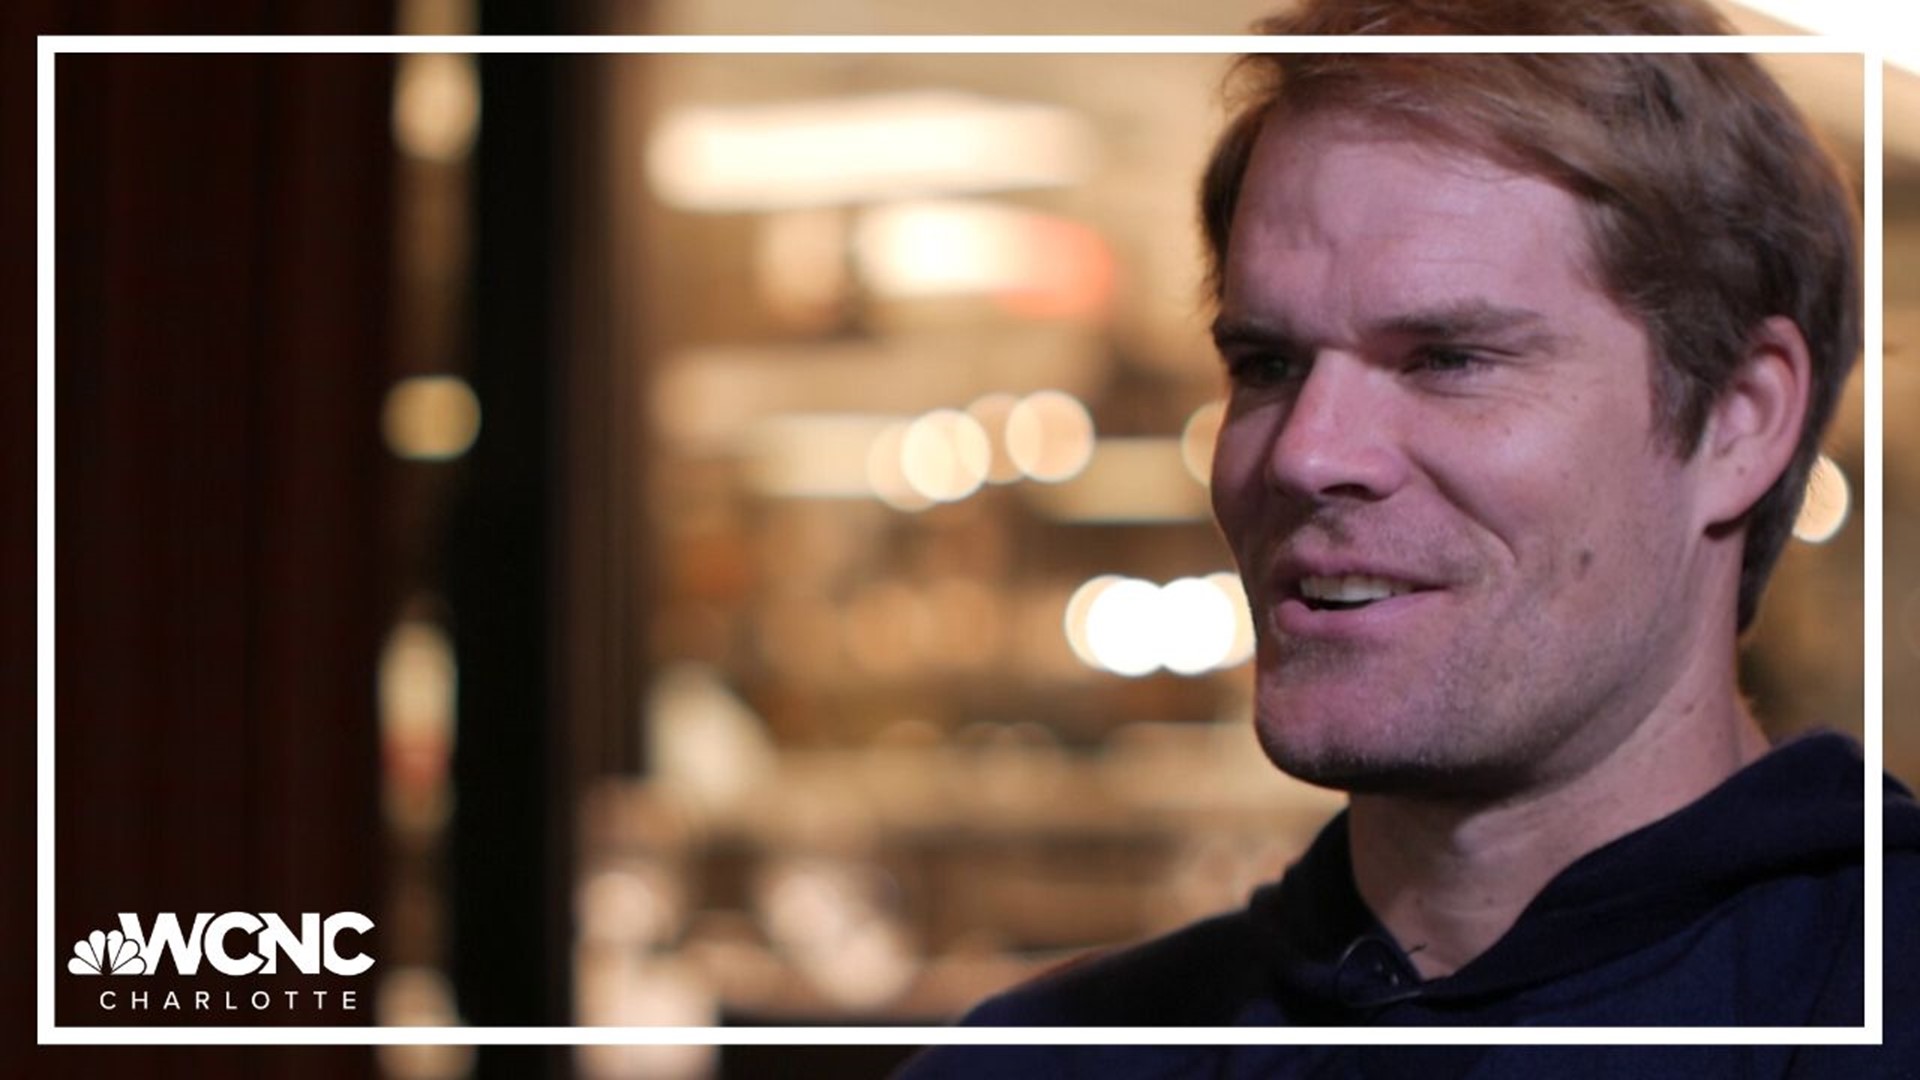 NFL on Fox analyst Greg Olsen sits down with WCNC Charlotte to discuss his role on TV, Tom Brady replacing him and the possibility of becoming an NFL head coach.